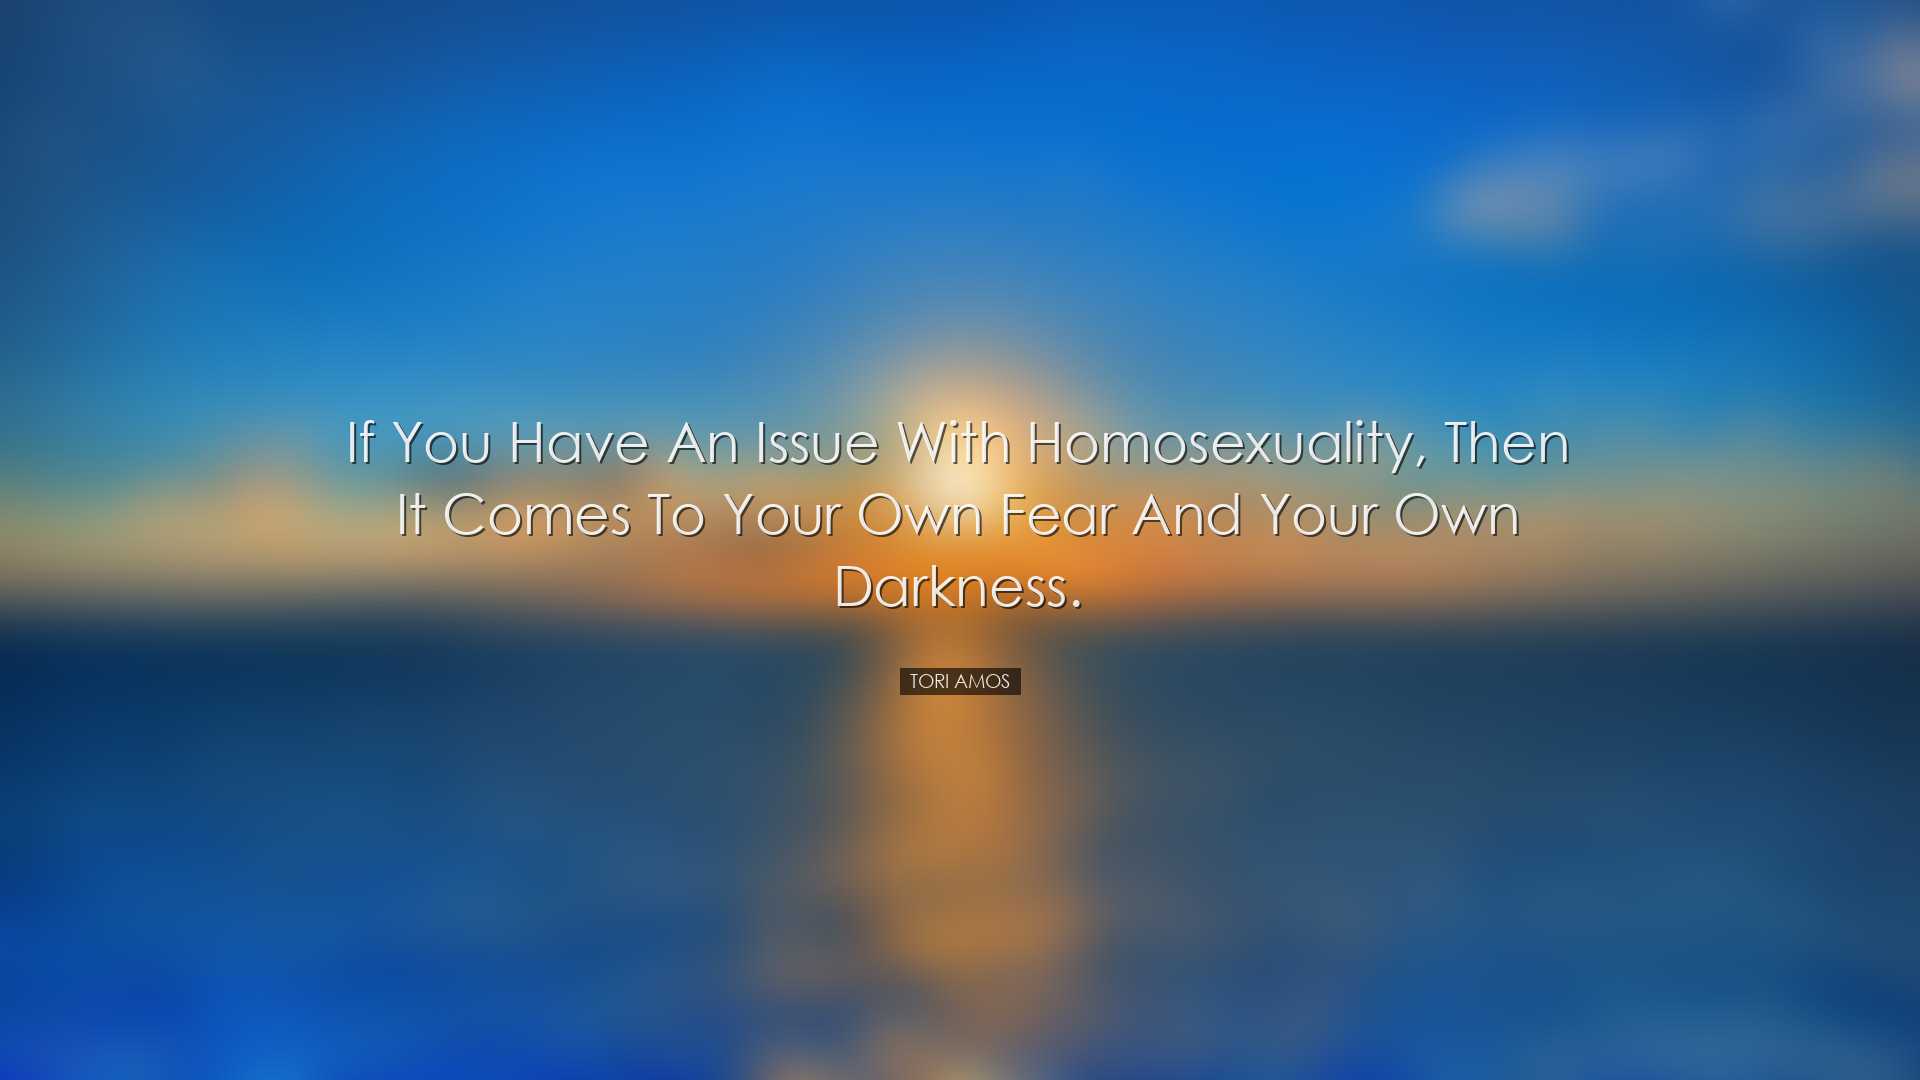 If you have an issue with homosexuality, then it comes to your own